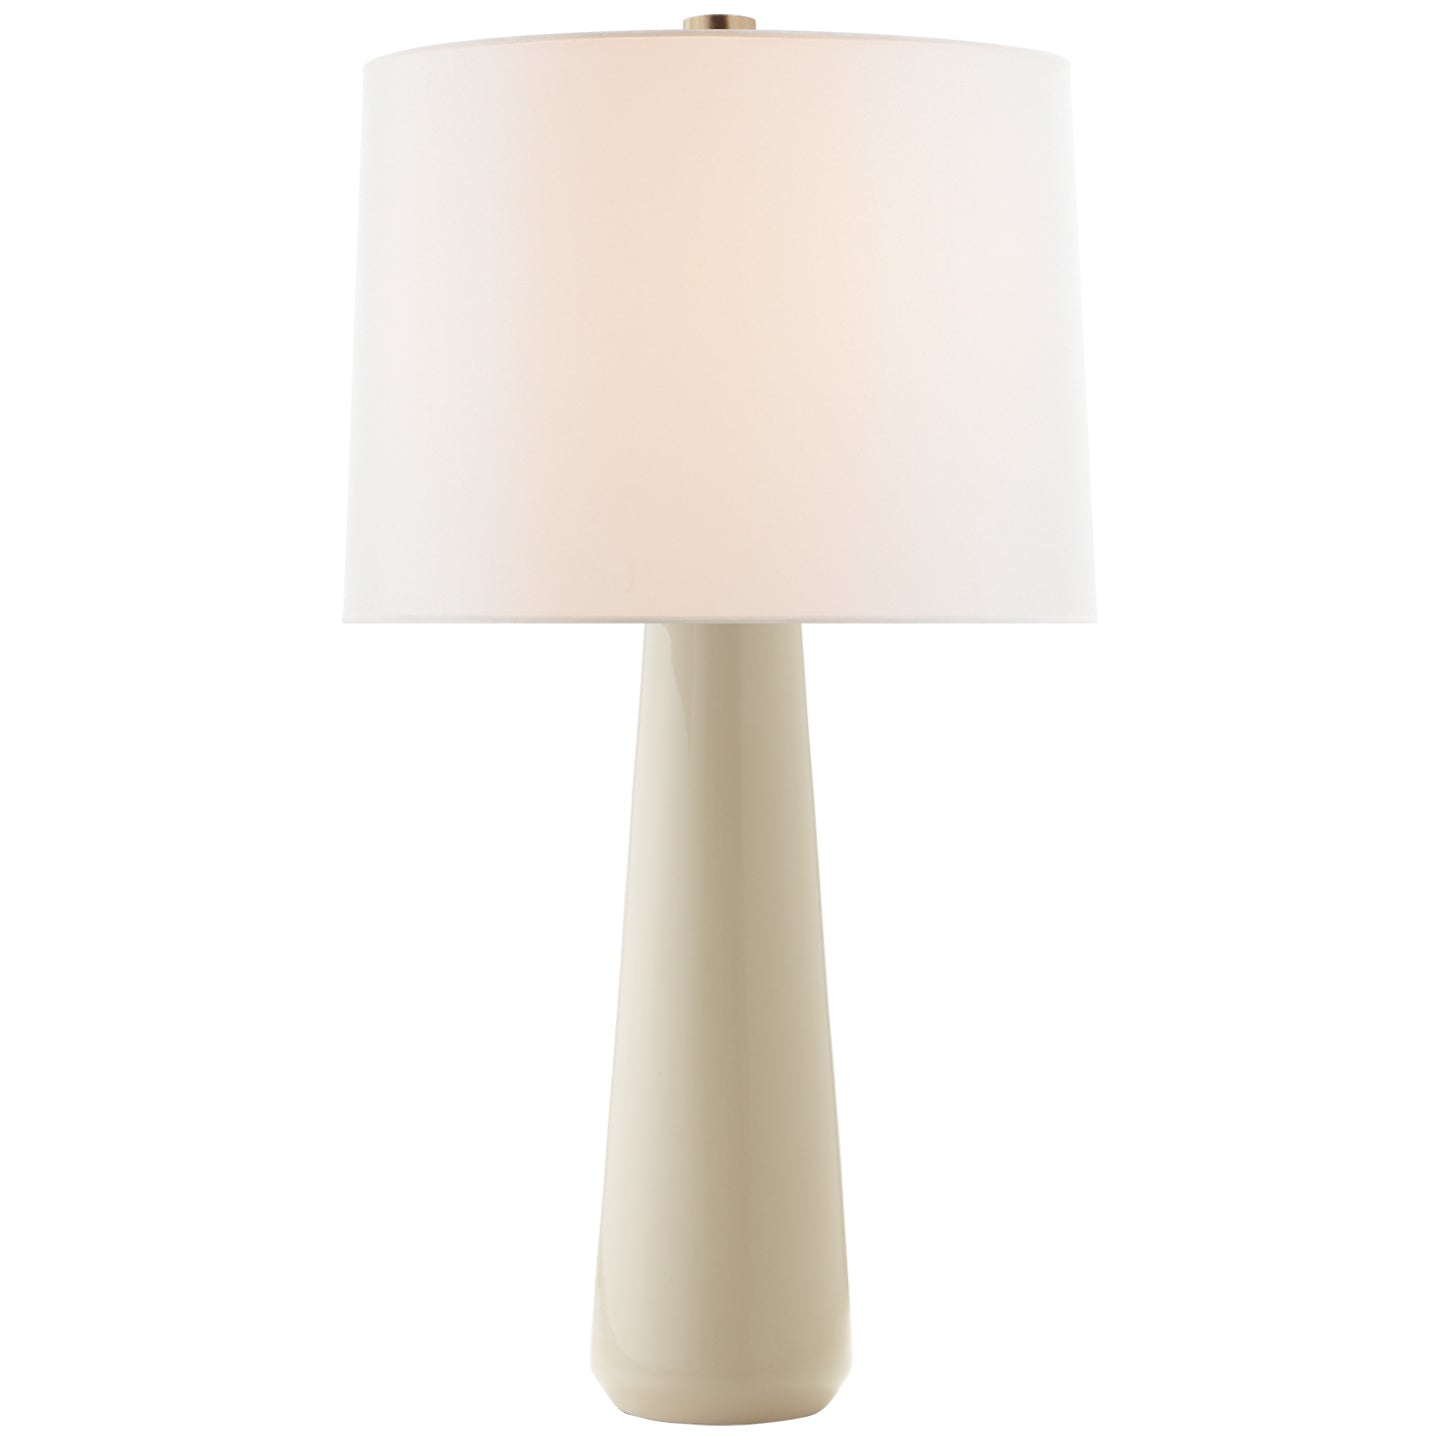 Visual Comfort Signature - BBL 3901IVO-L - One Light Table Lamp - Athens - Ivory